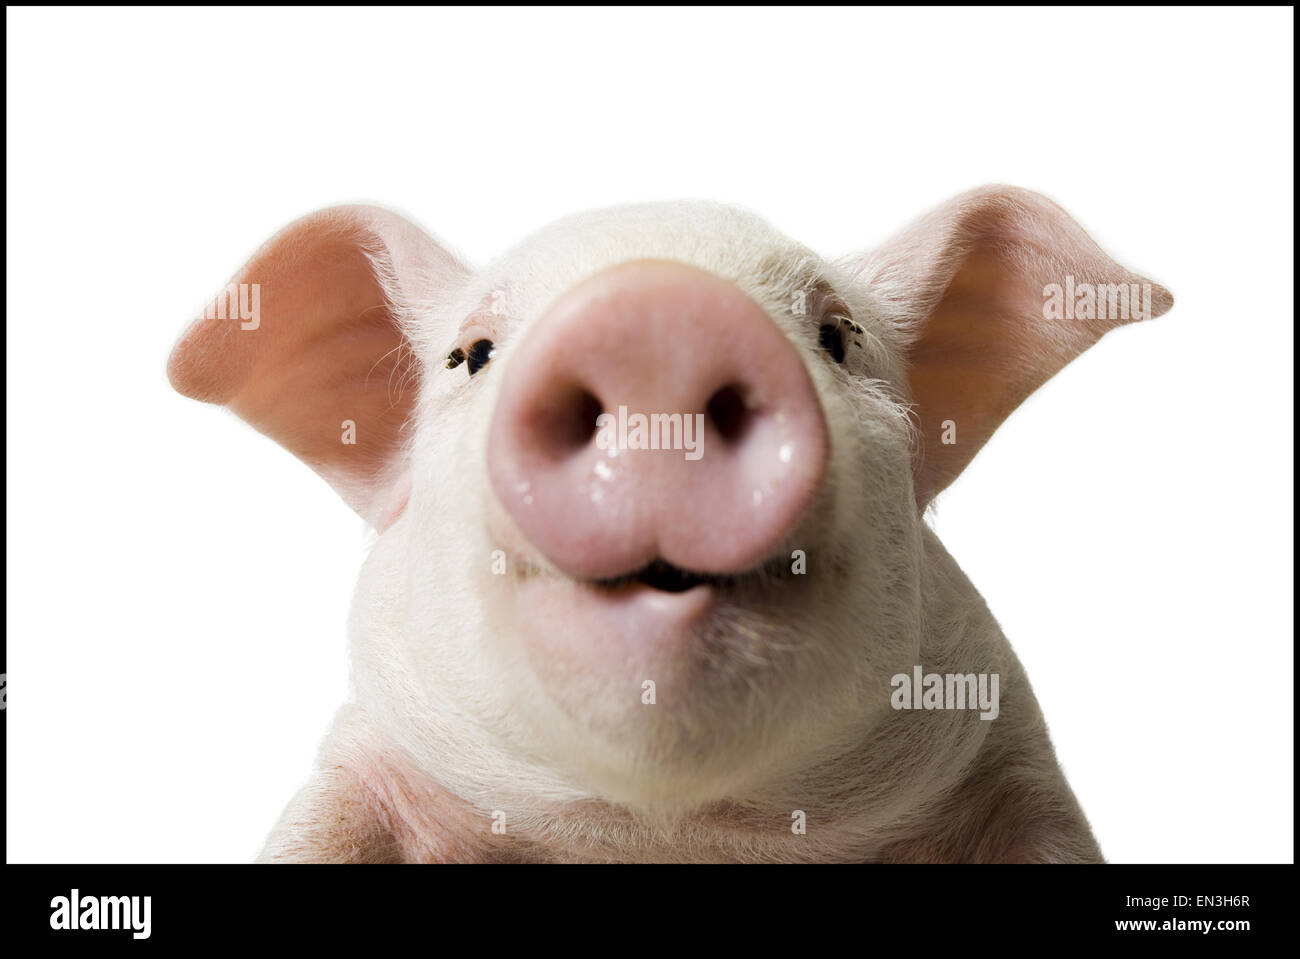 Pig face and snout close up Stock Photo